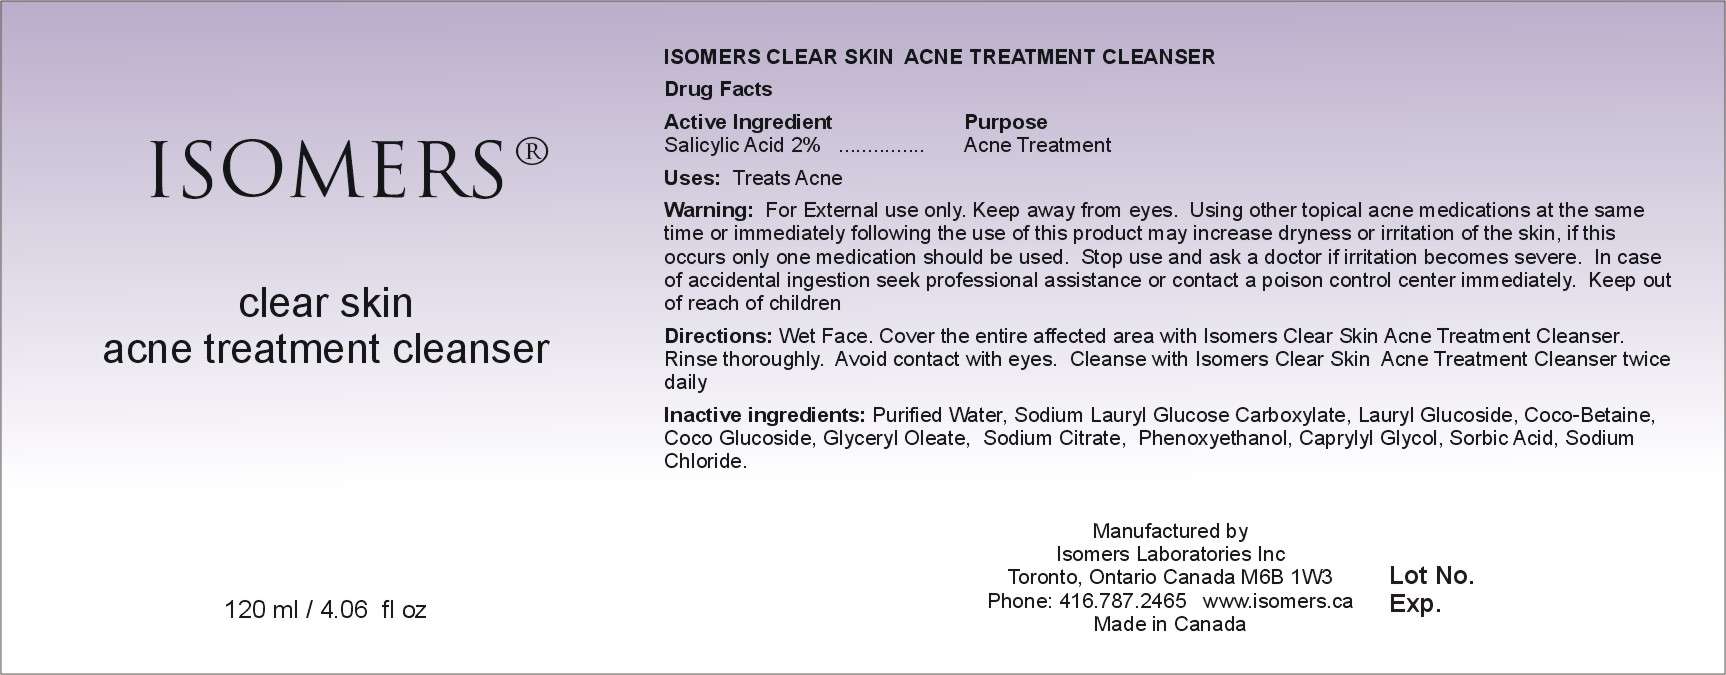 Isomers Clear Skin Acne Treatment Cleanser